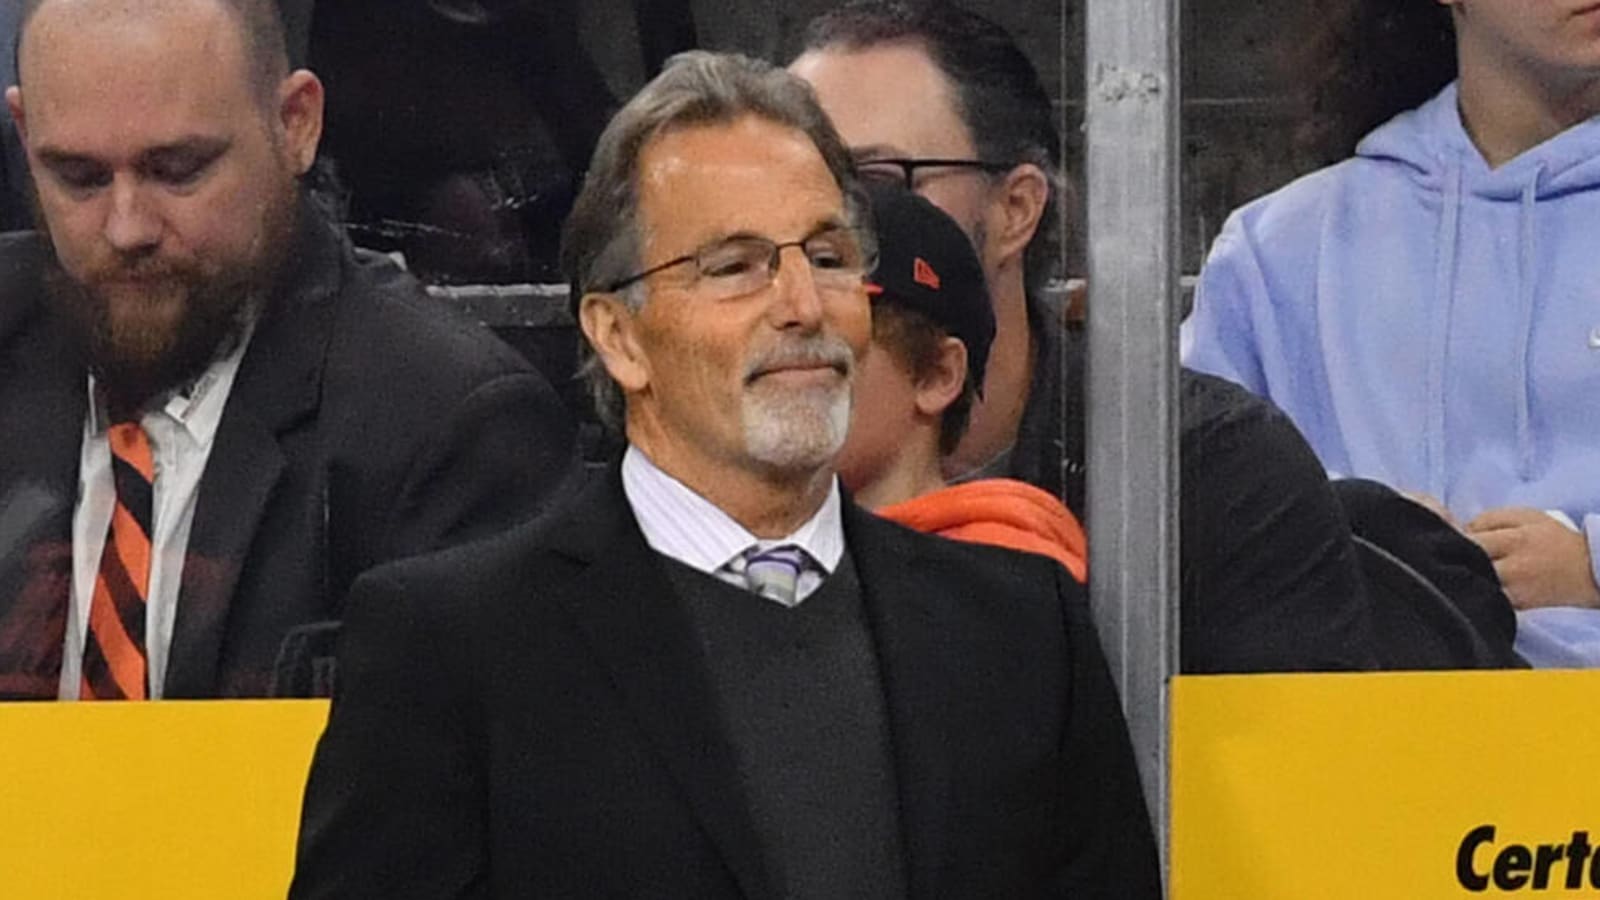 Is John Tortorella eyeing a move from head coach to front office?